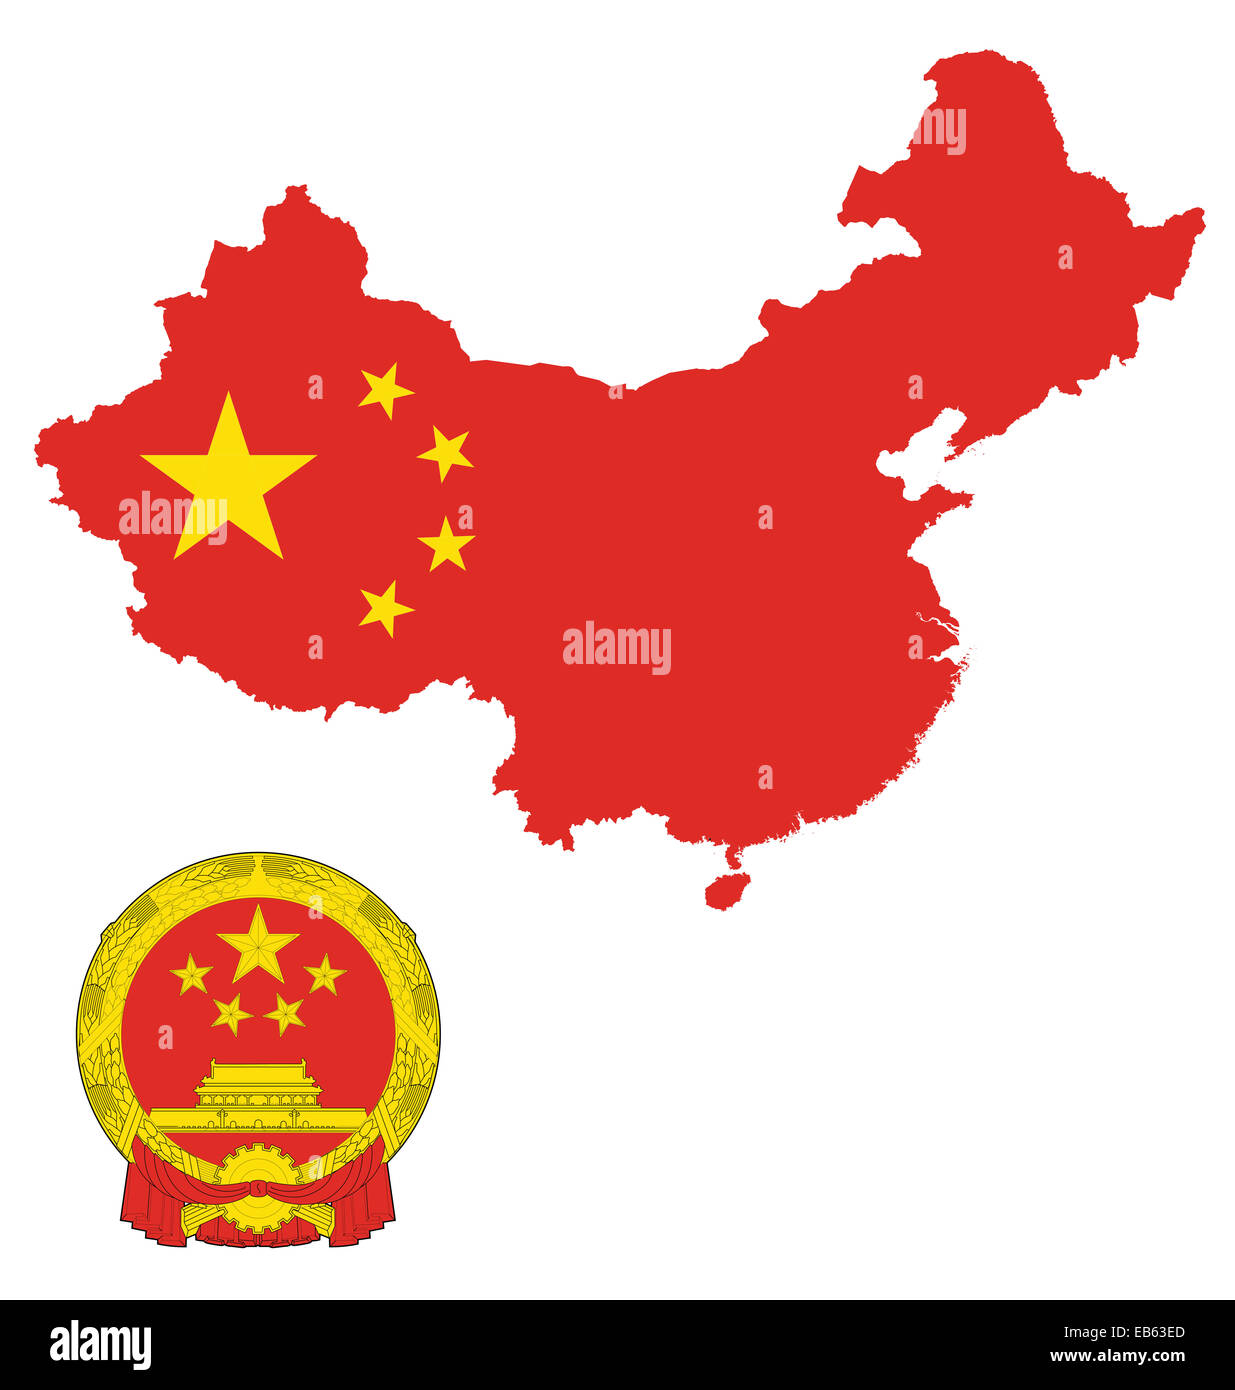 Flag and national emblem of the Peoples Republic China Stock Photo